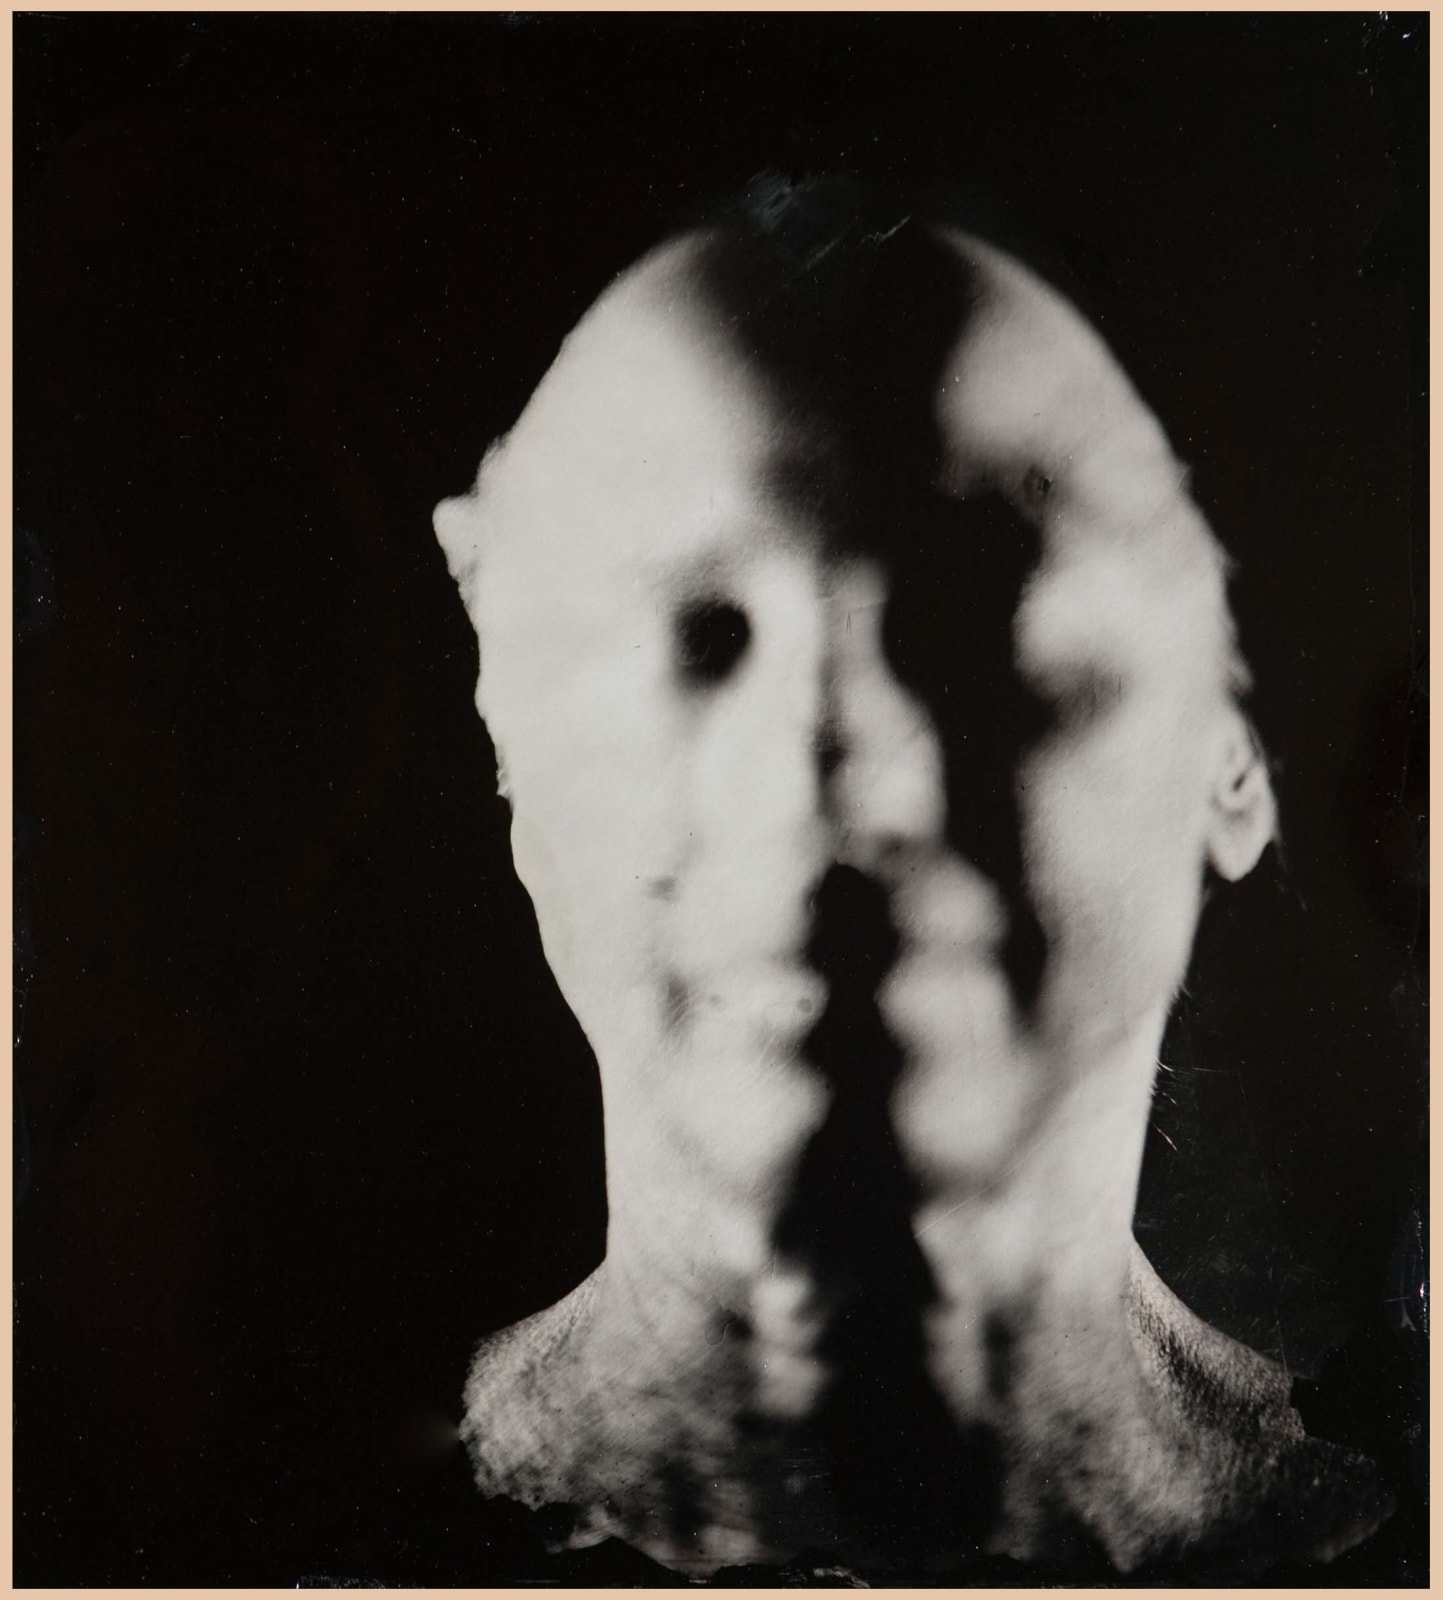 Sally Mann ambrotype self-portrait from the Upon Reflection series